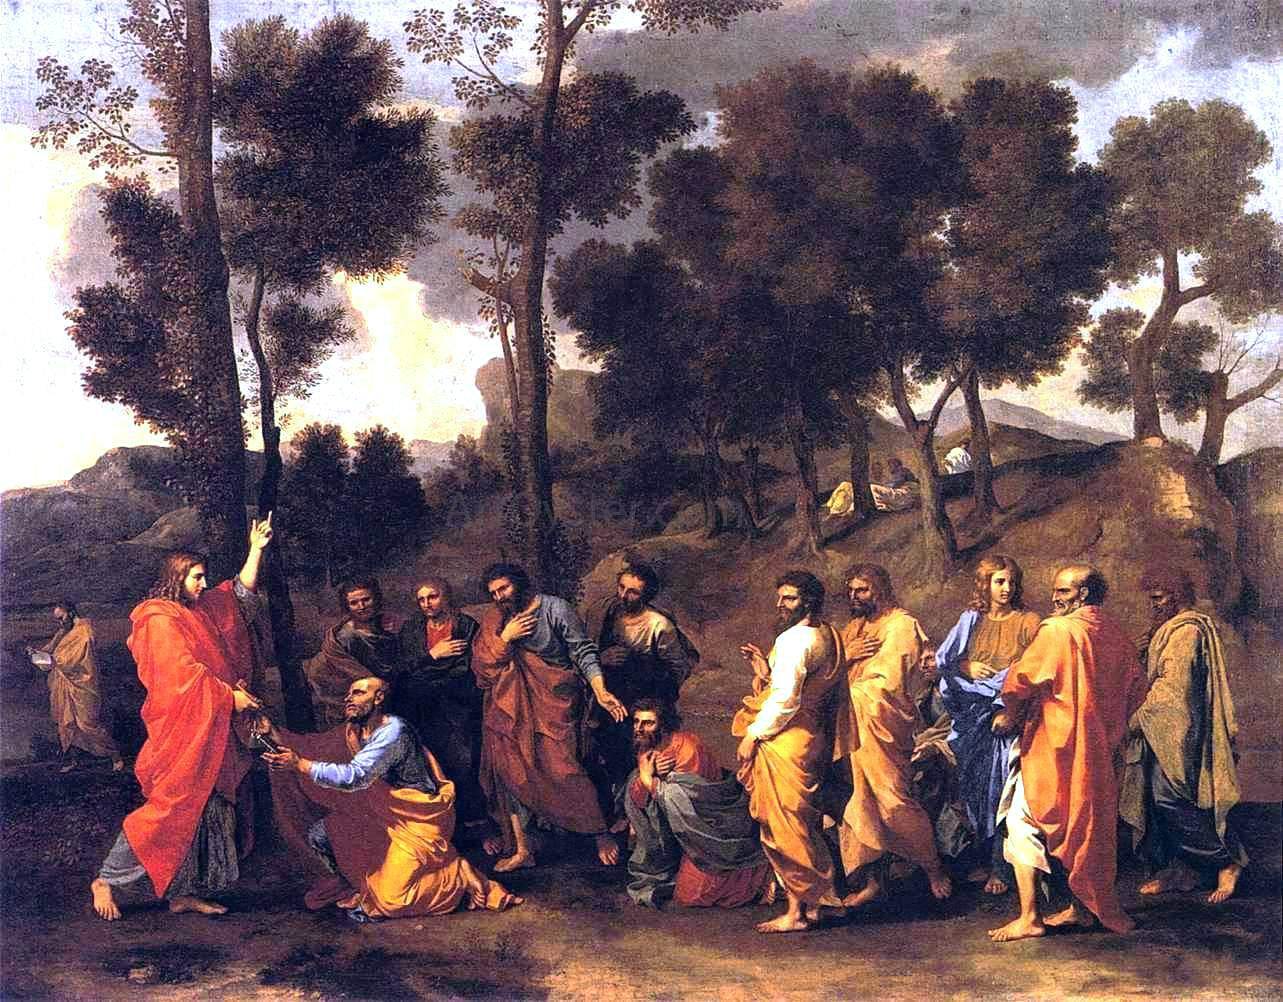  Nicolas Poussin The Sacrament of Ordination - Hand Painted Oil Painting